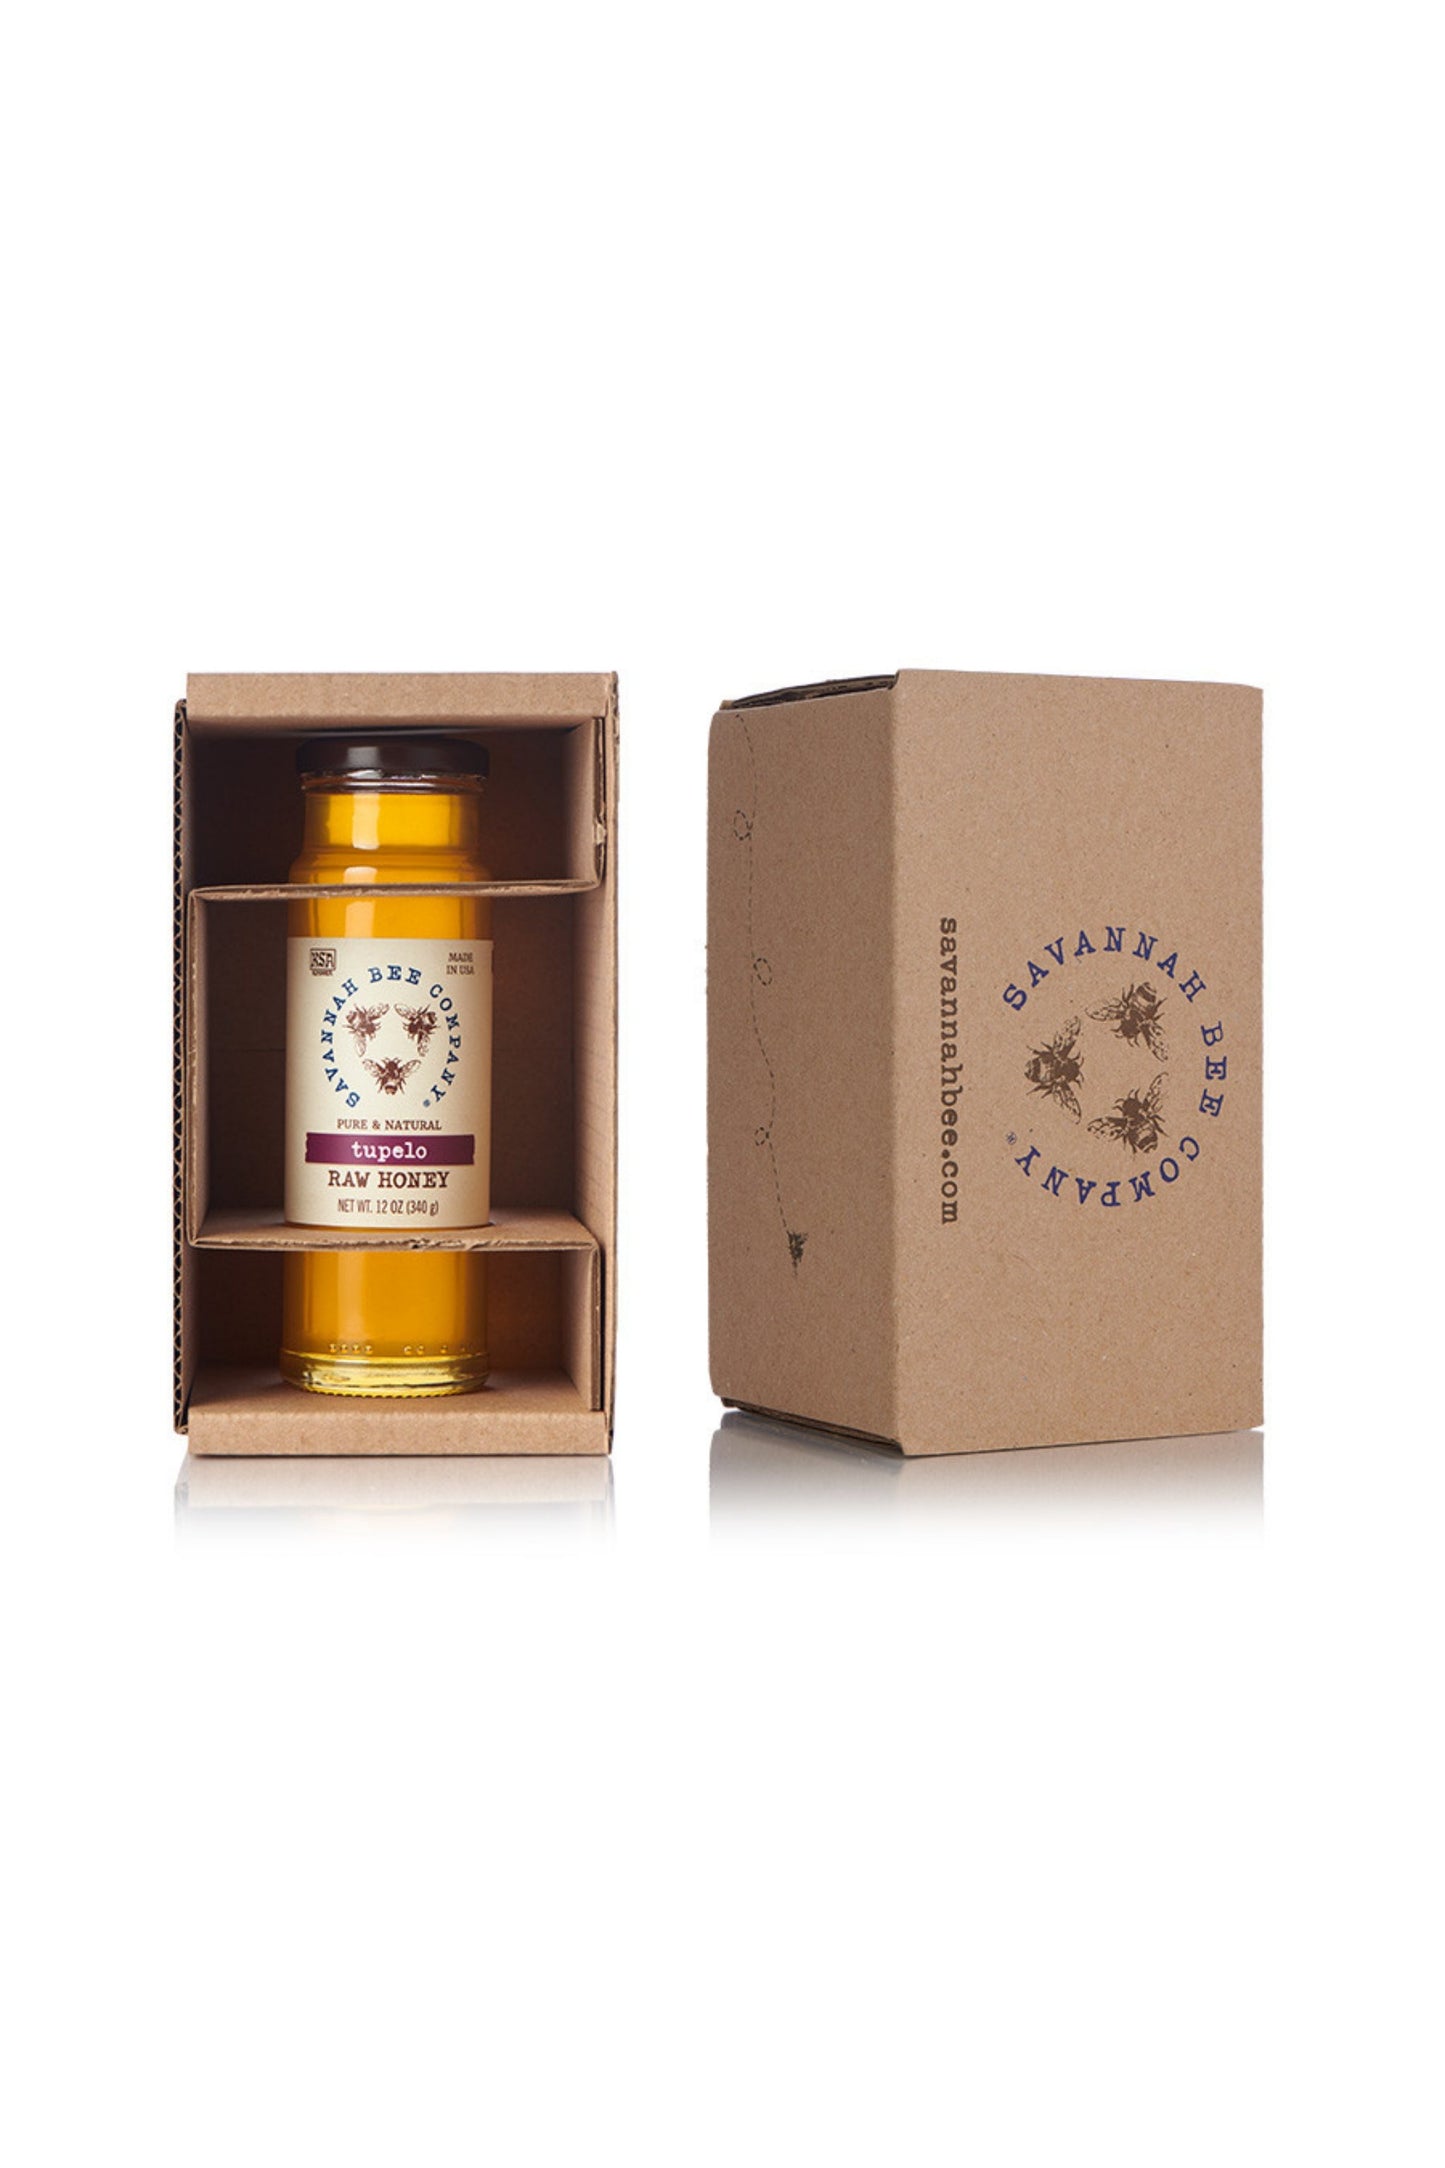 Pure & Natural Tupelo Raw Honey 12 oz. tower in a gift box